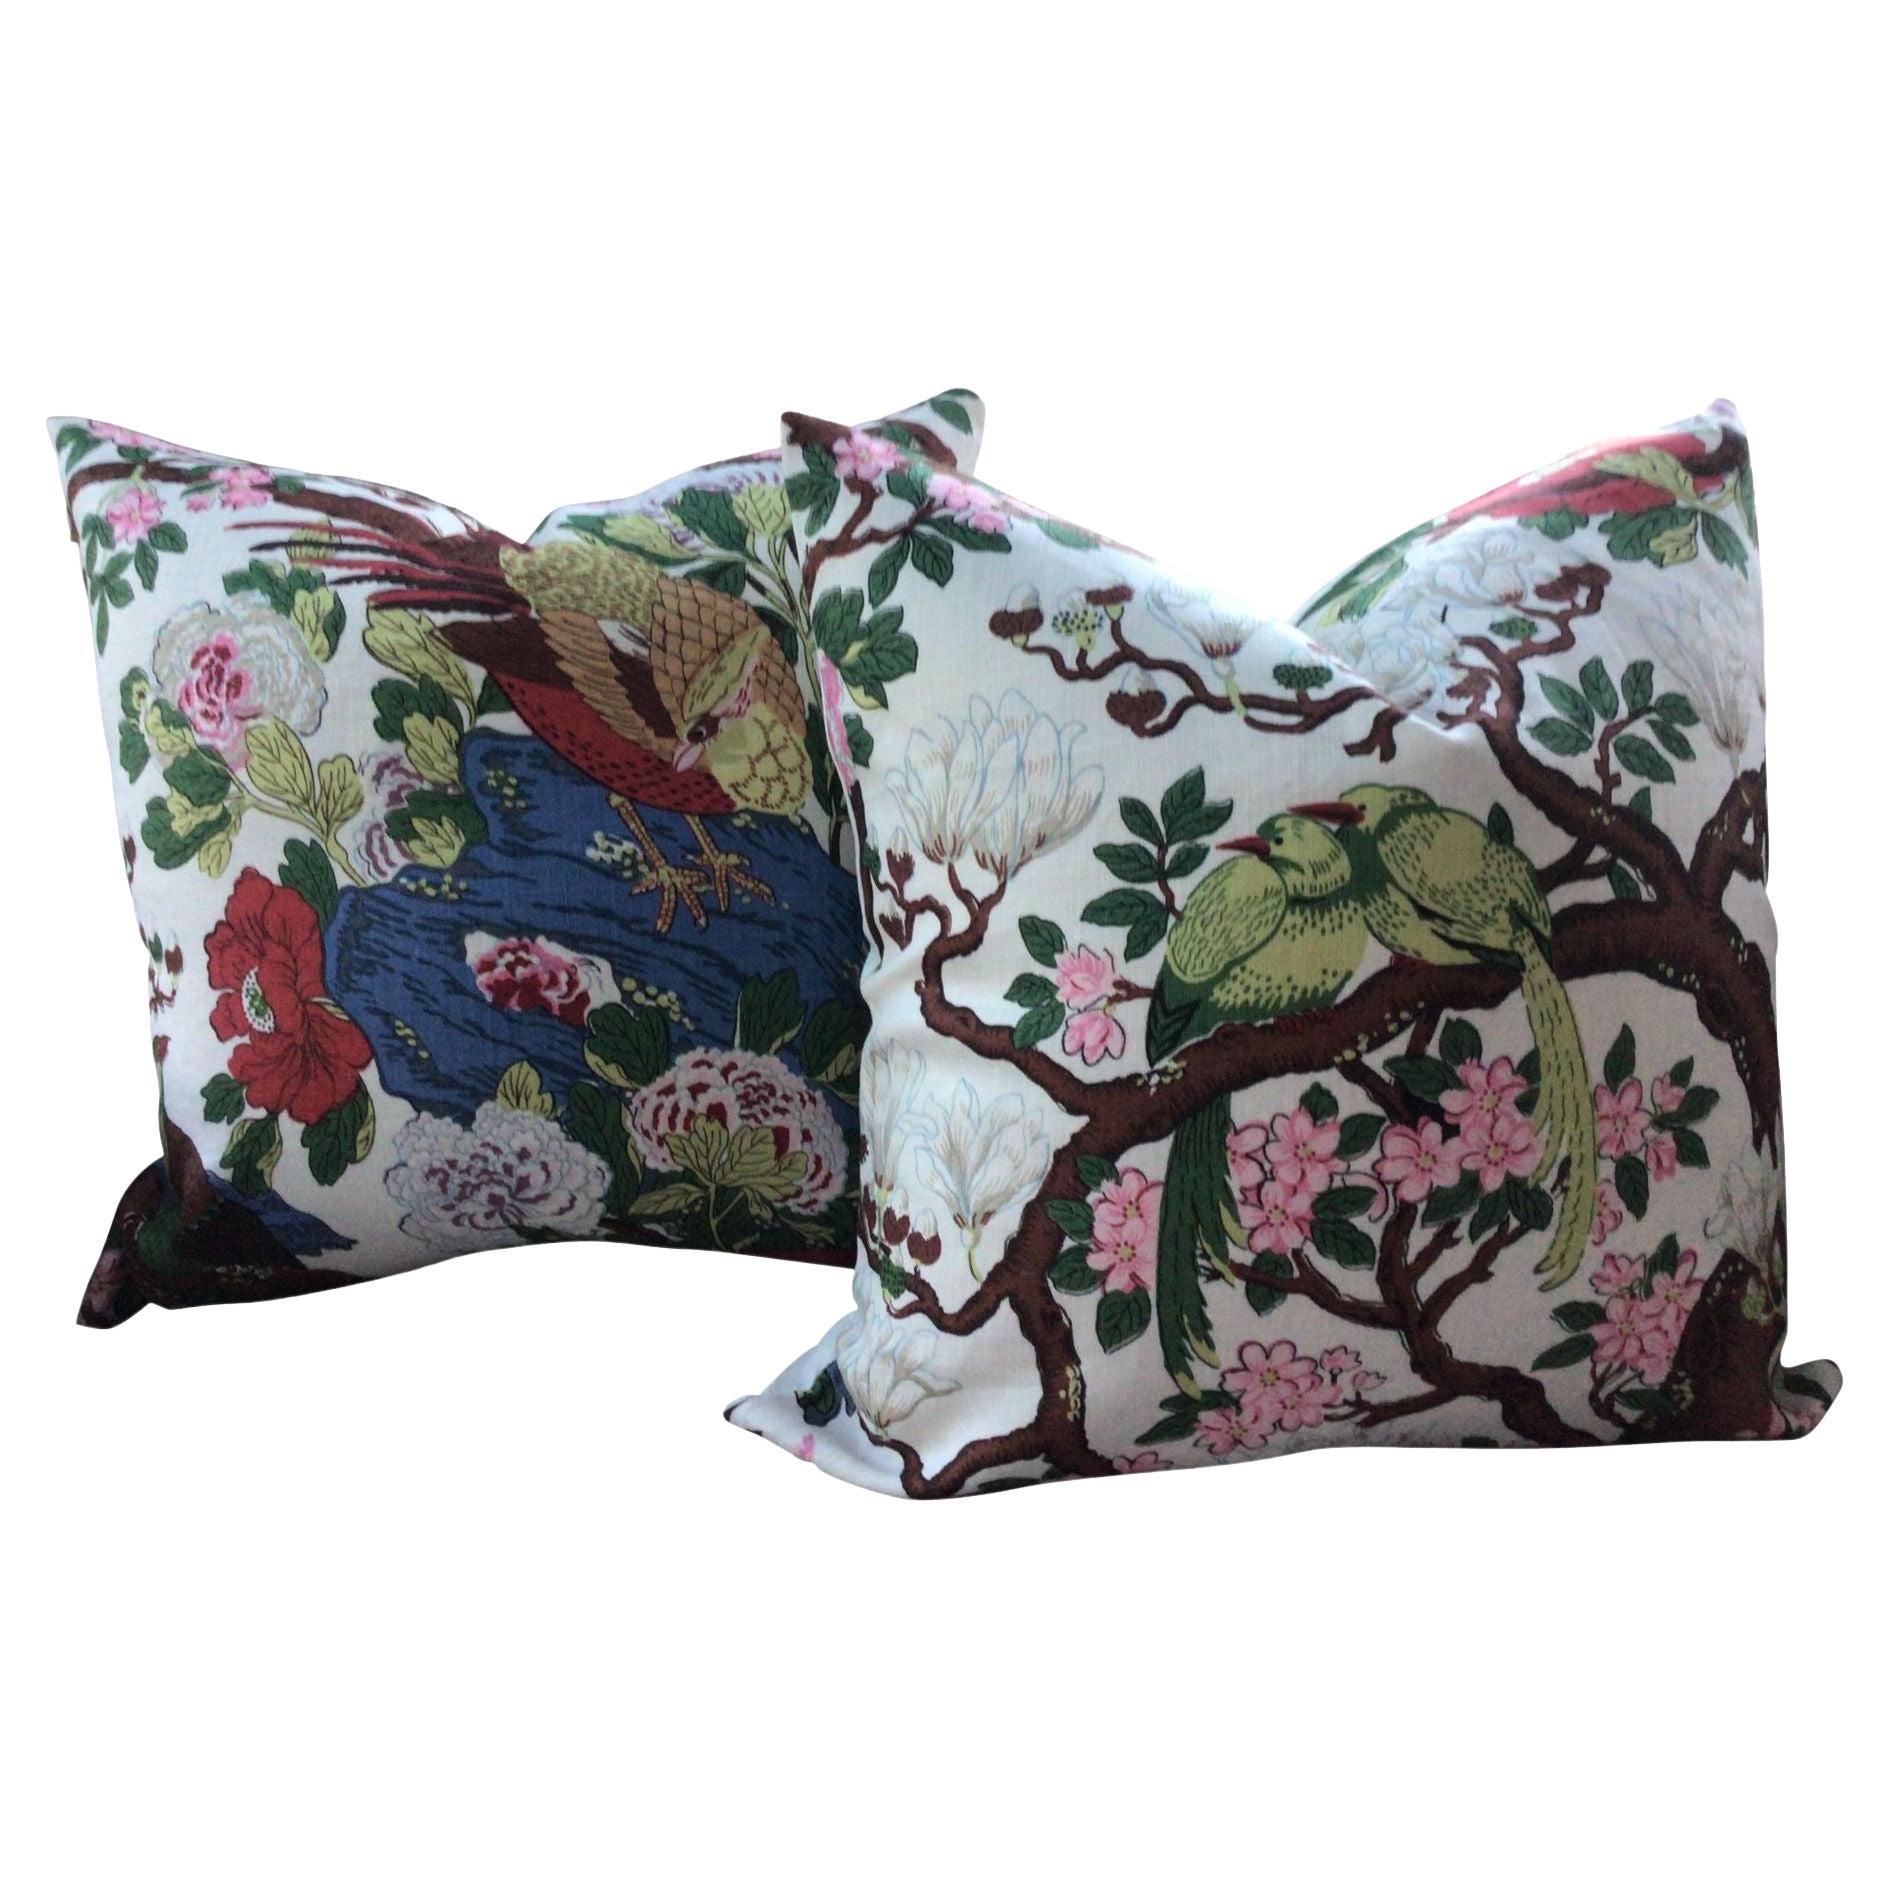 G.P. And J. Baker “Rockbird” Multi on White of 22” Down Filled Pillows - a Pair For Sale